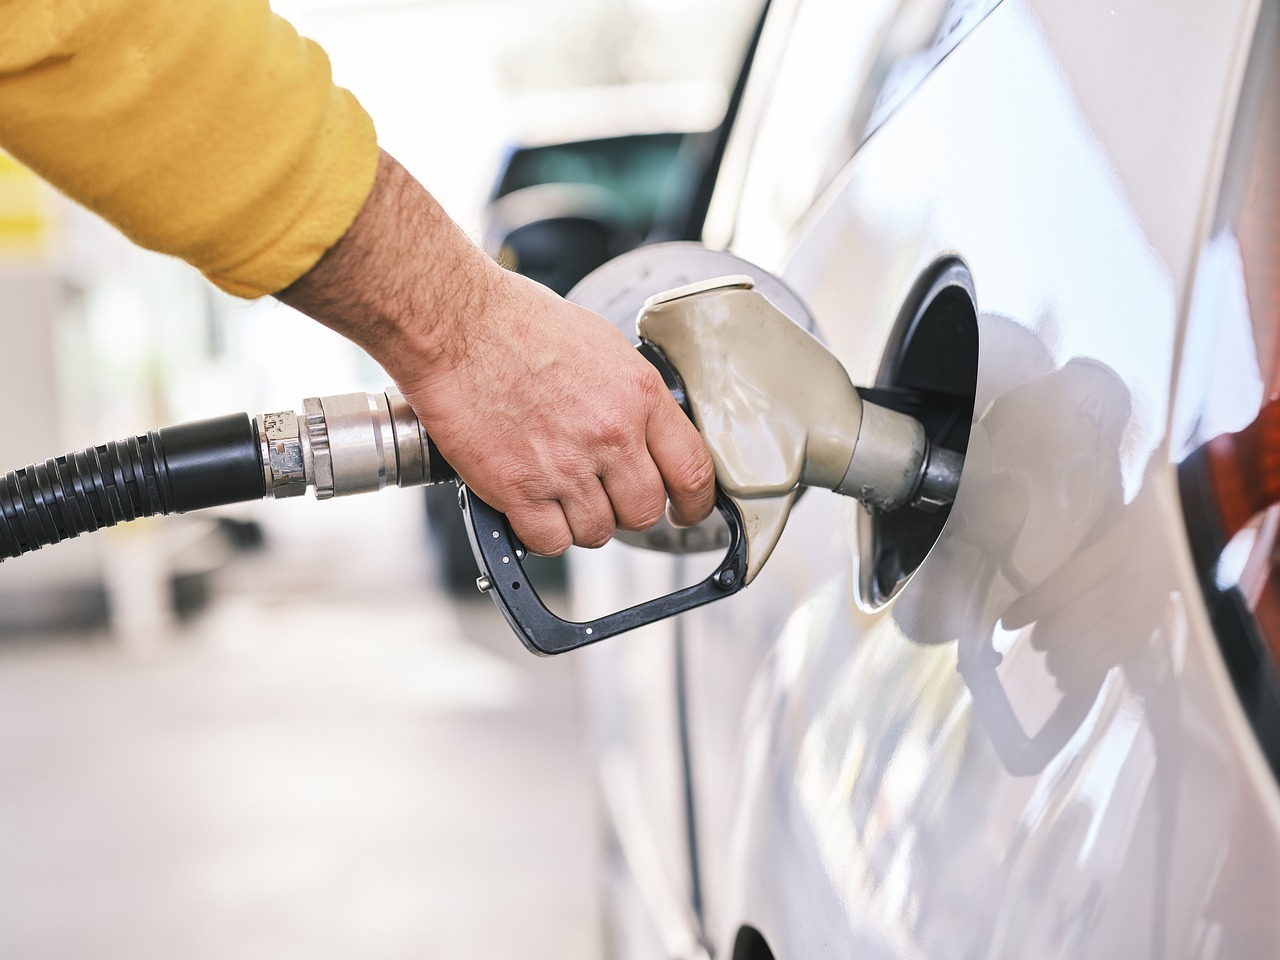 How to Maximize Fuel Usage for Your Car